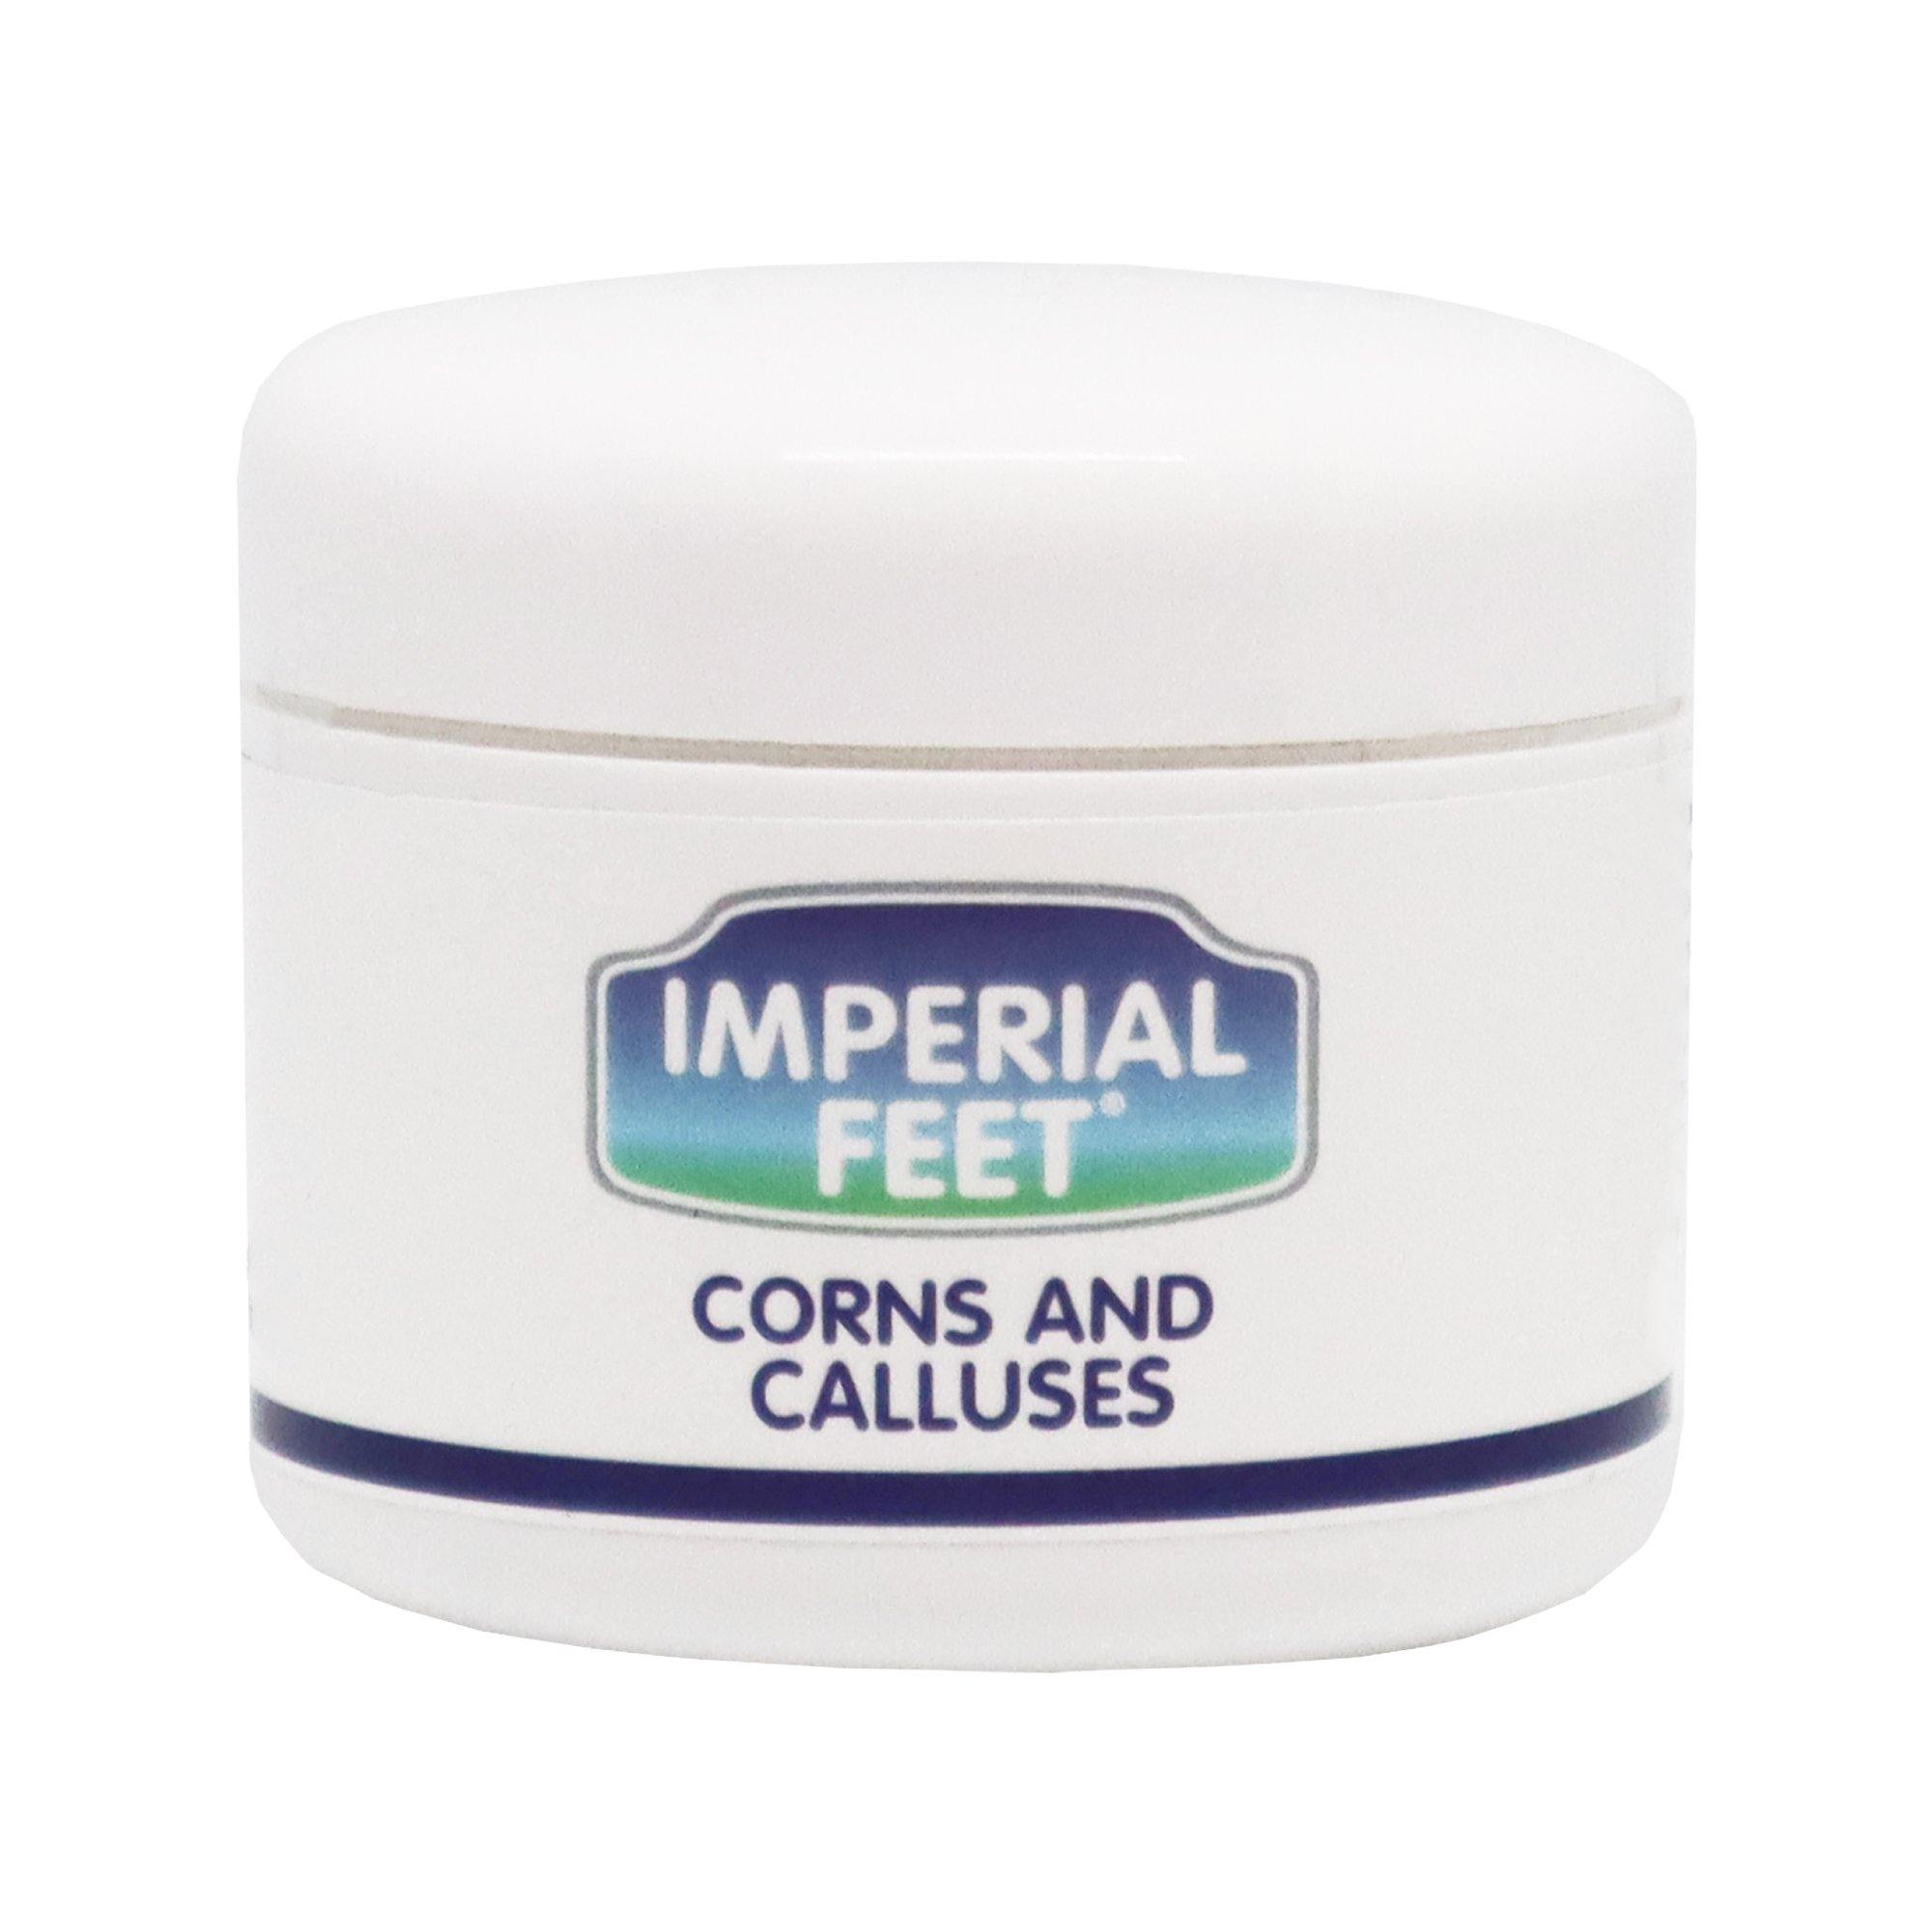 Corns and Calluses - Imperial Feet - Foot care products - B2C, Best seller homepage, Corns and Calluses